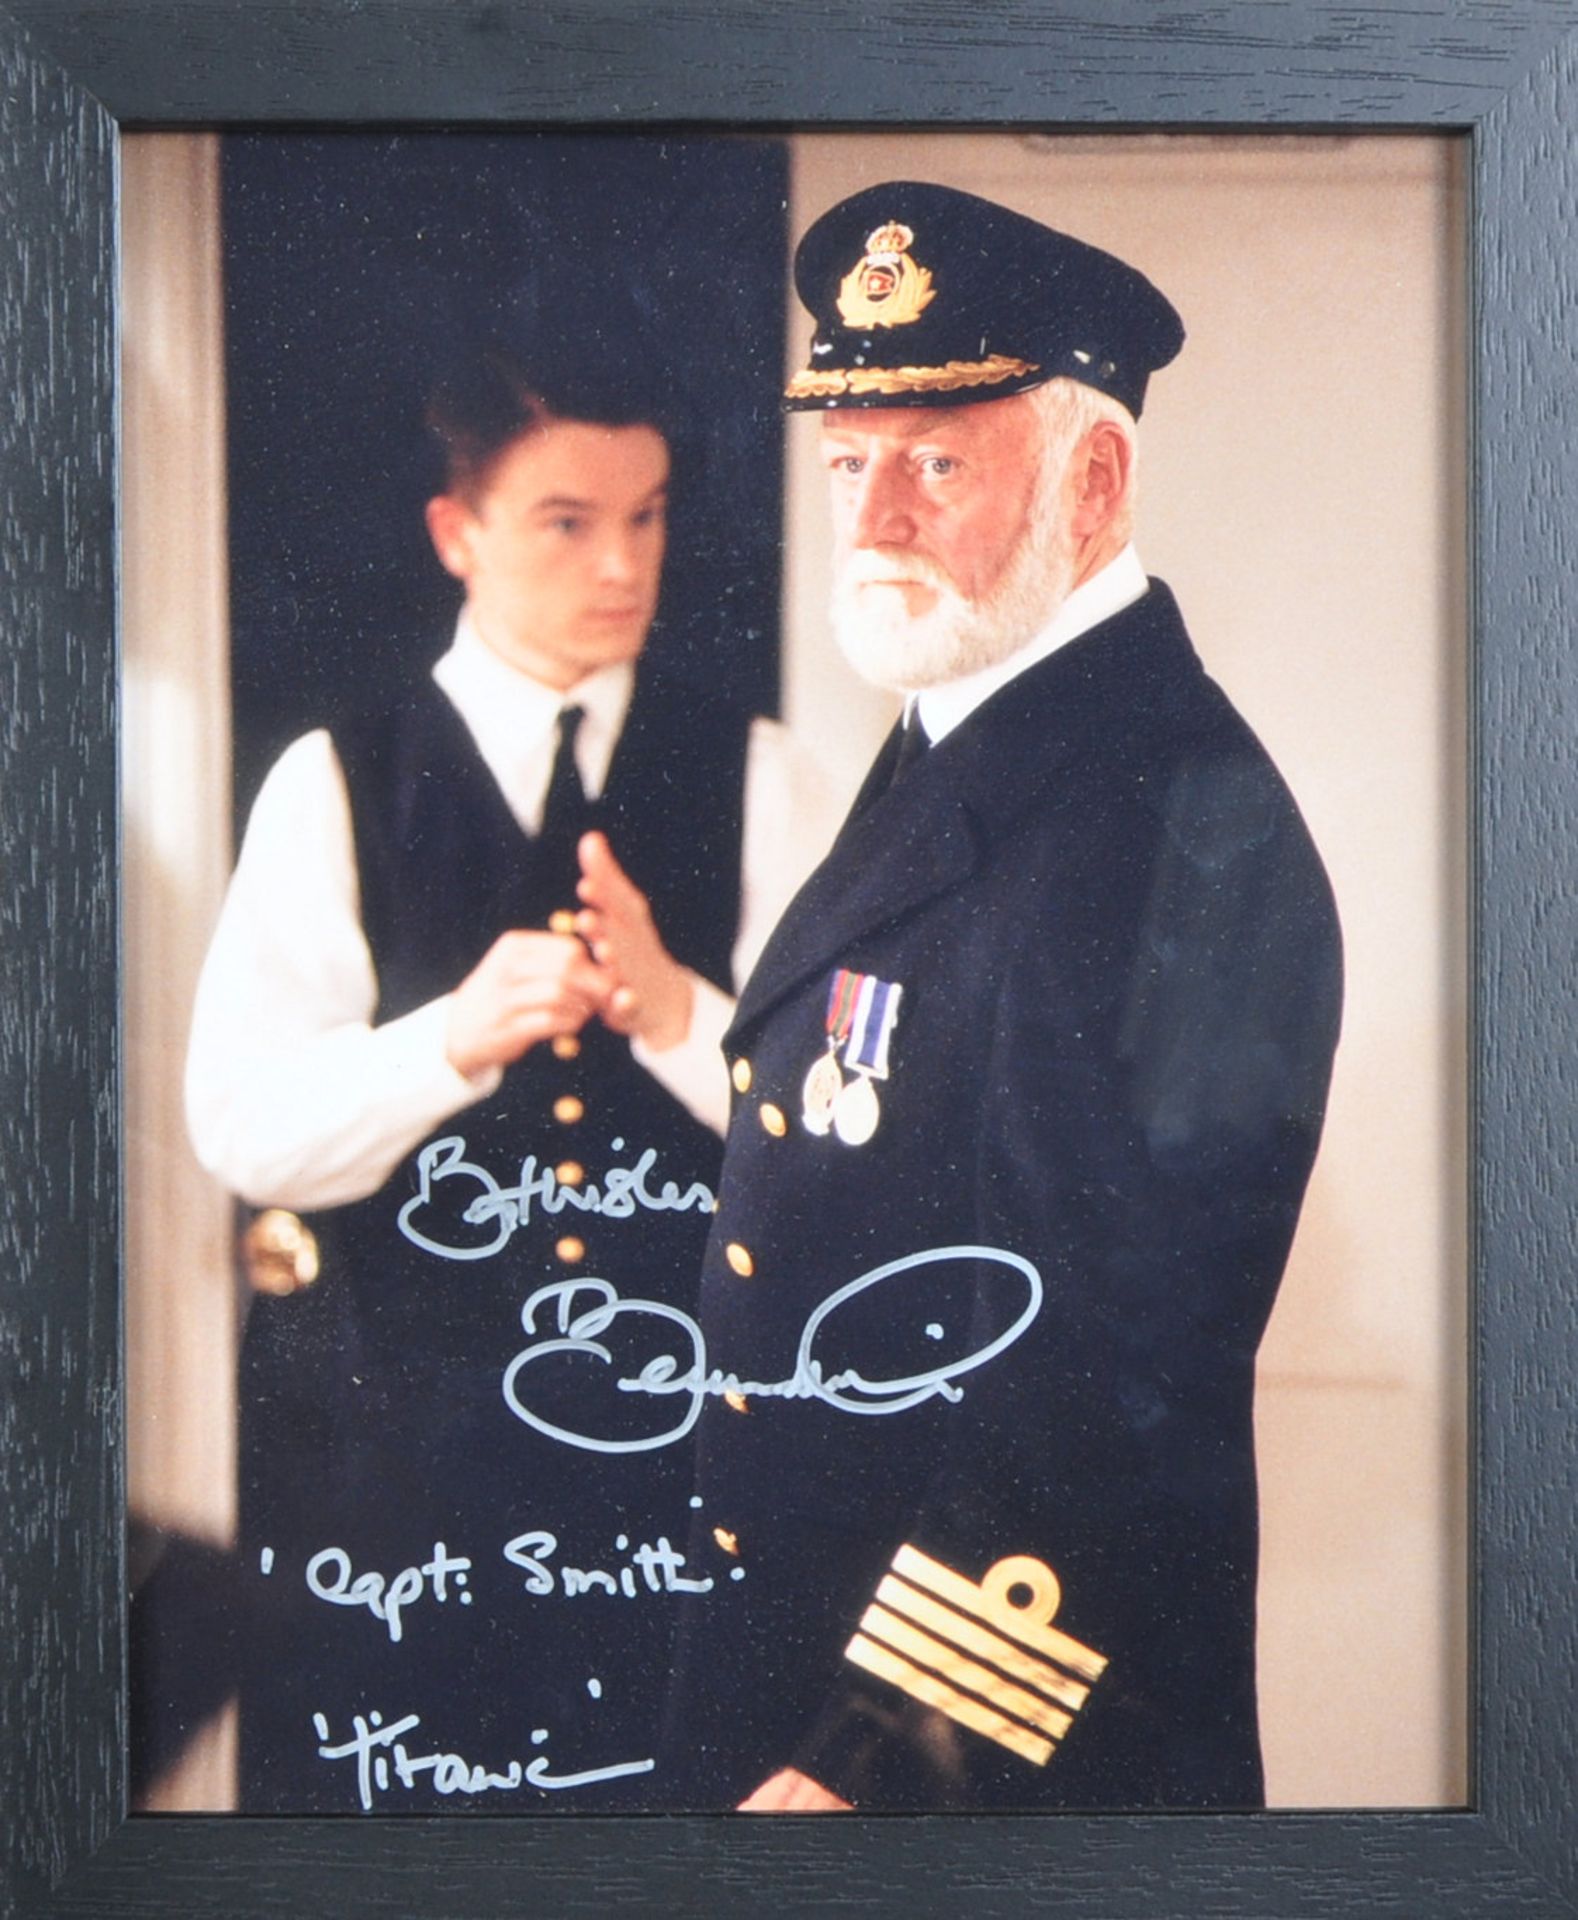 COLLECTION OF BERNARD HILL - TITANIC (1997) - SIGNED PHOTO